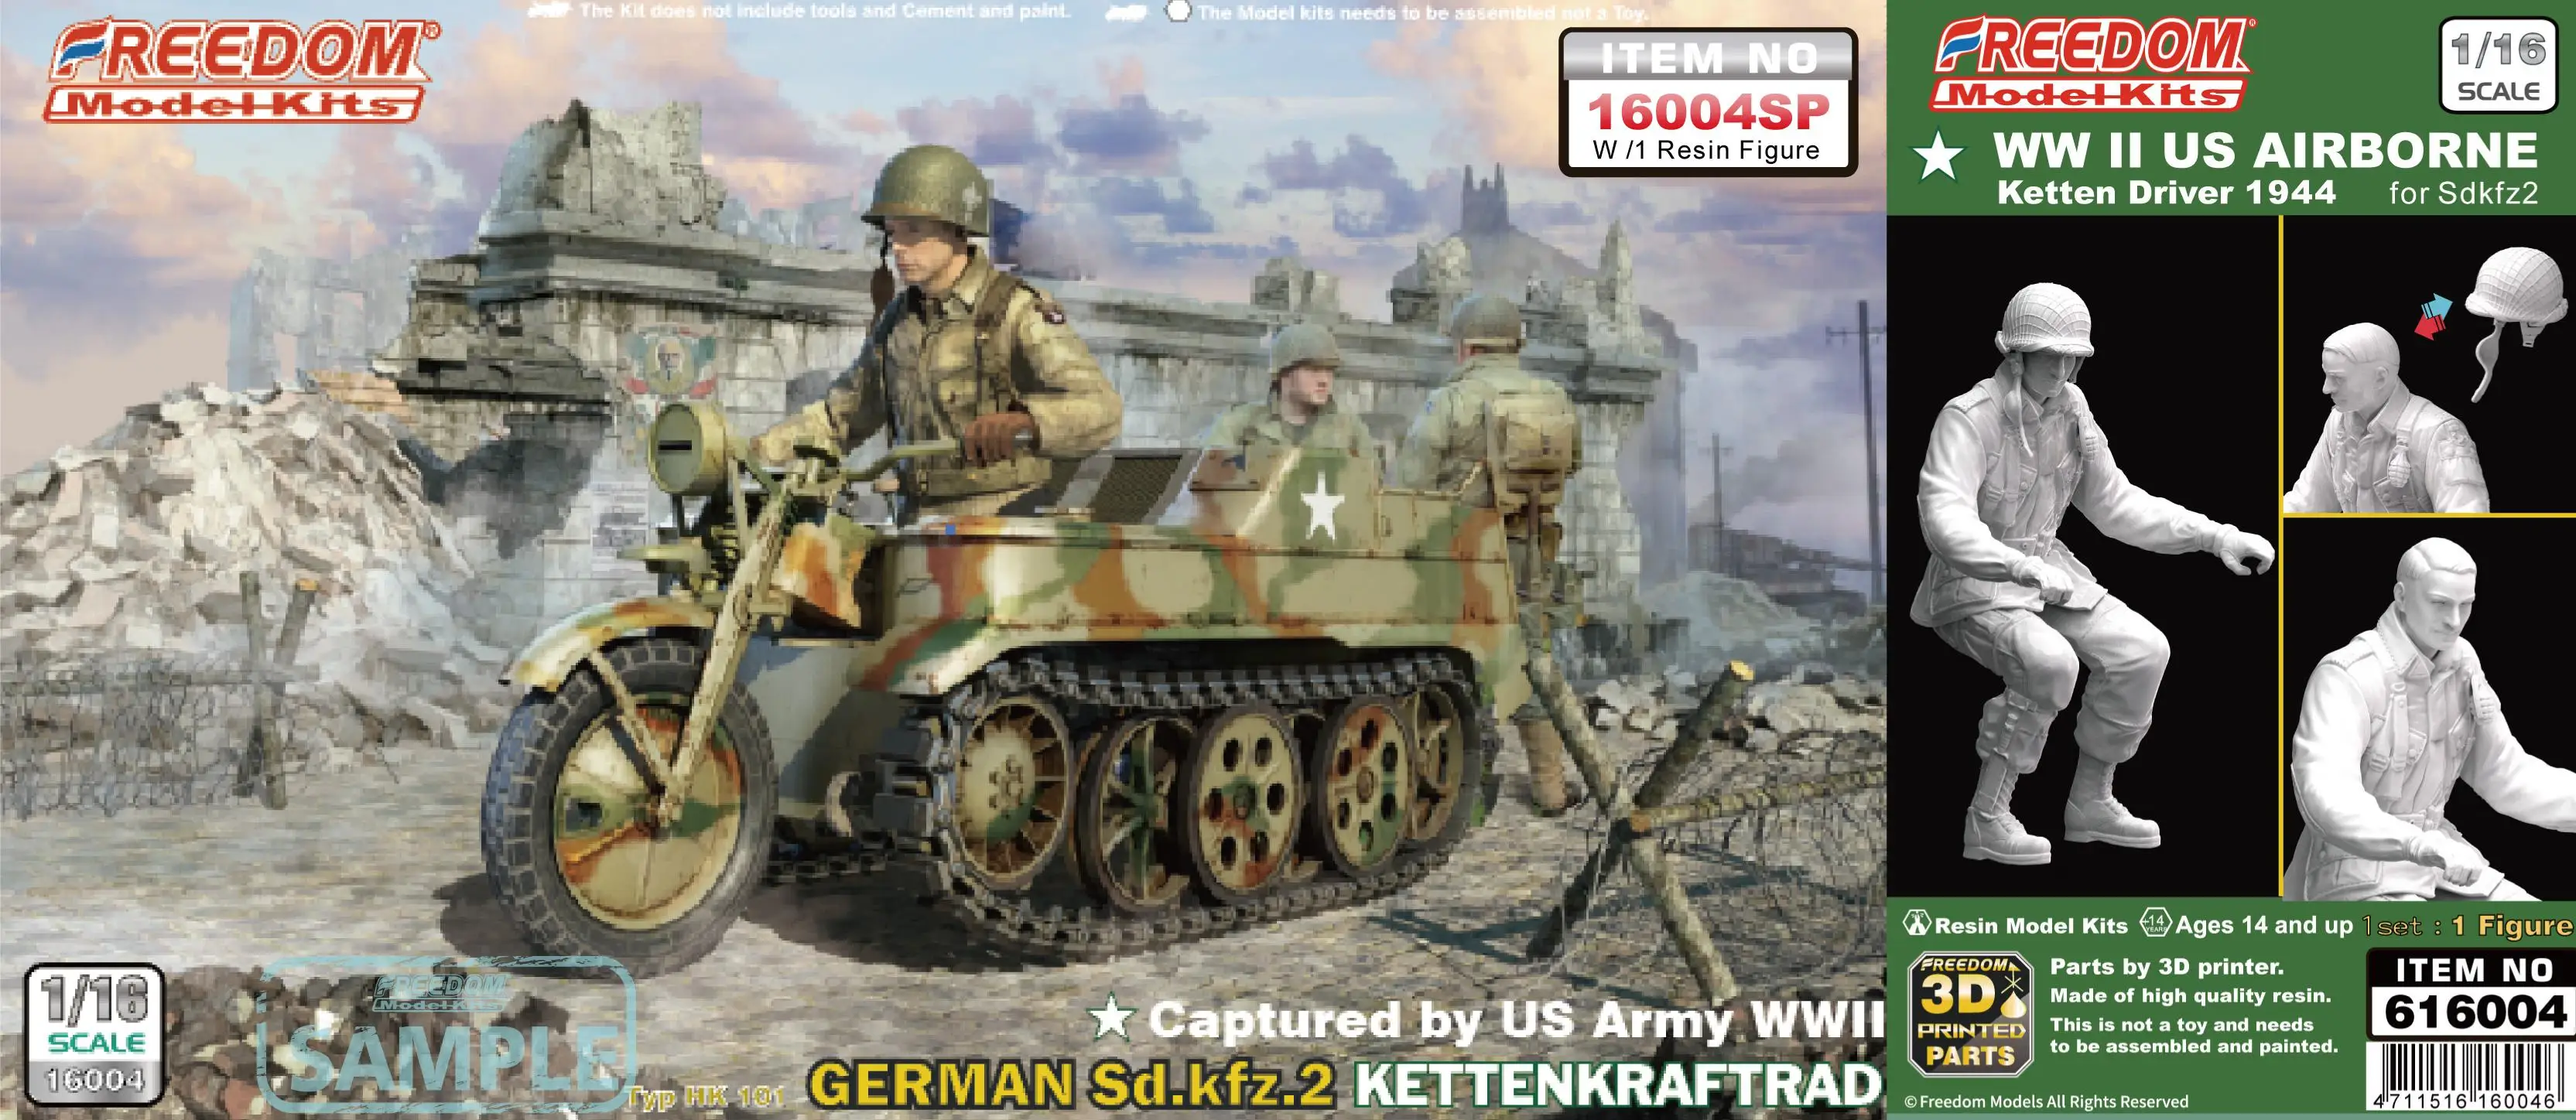 

FREEDOM 16004SP 1/16 Scale Captured by US Army WWII German Sd.Kfz.2 Kettenkraftrad +US AIRBORNE Ketten Driver Set